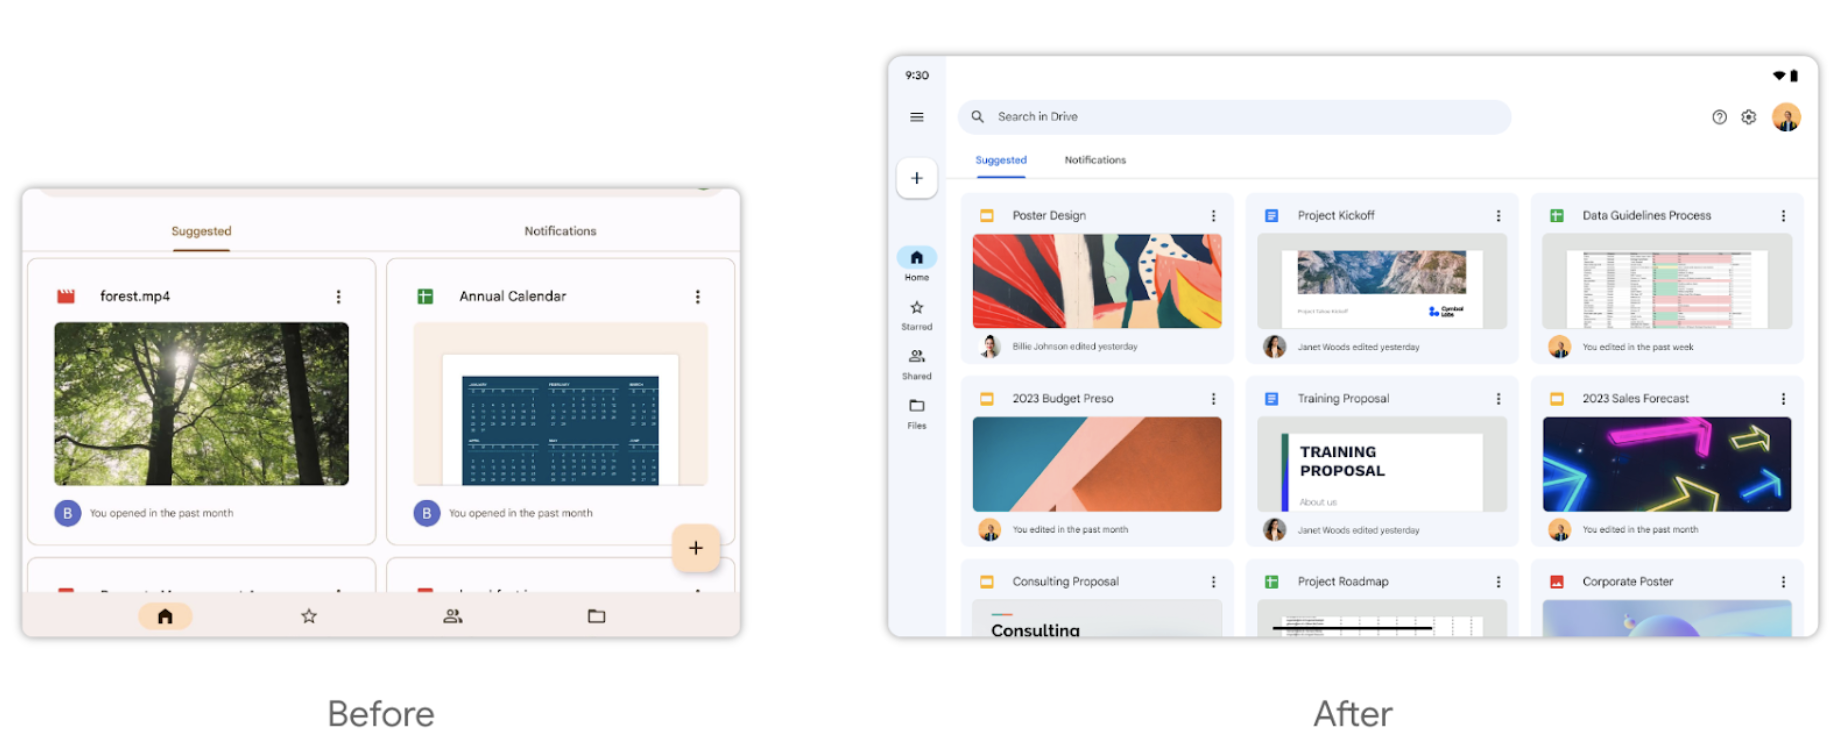 Google enhances Drive mobile experience on Android tablets